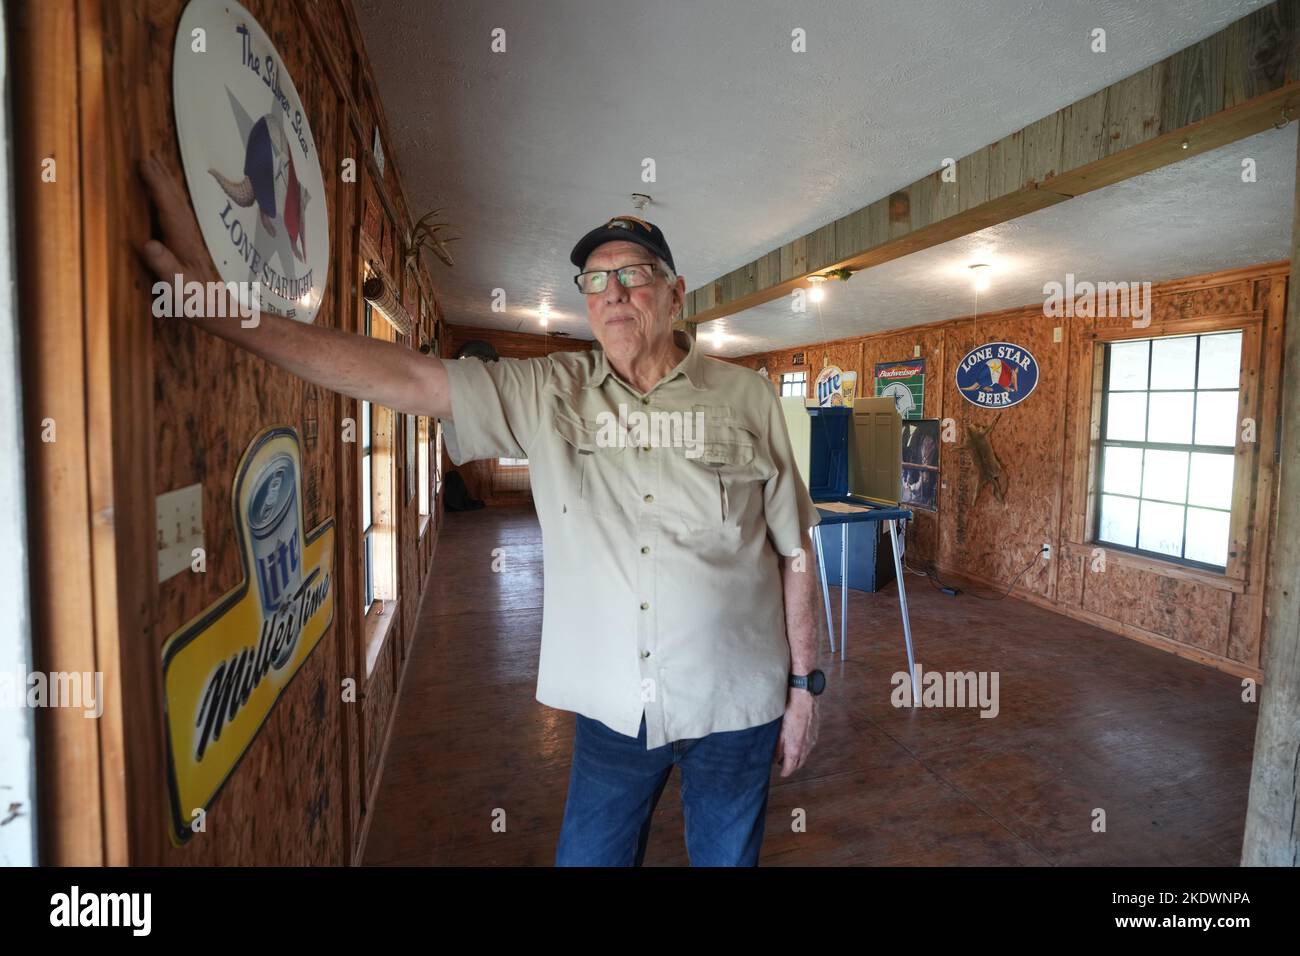 Live Oak County Texas USA, November 8 2022: Election Judge PHILLIP STORM waits in the old barbecue joint Ray's outside of Alice, Texas, for voters to arrive during the midterm elections in rural south Texas. The business has been closed about 15 years and is used regularly as a rural polling place. Credit: Bob Daemmrich/Alamy Live News Stock Photo